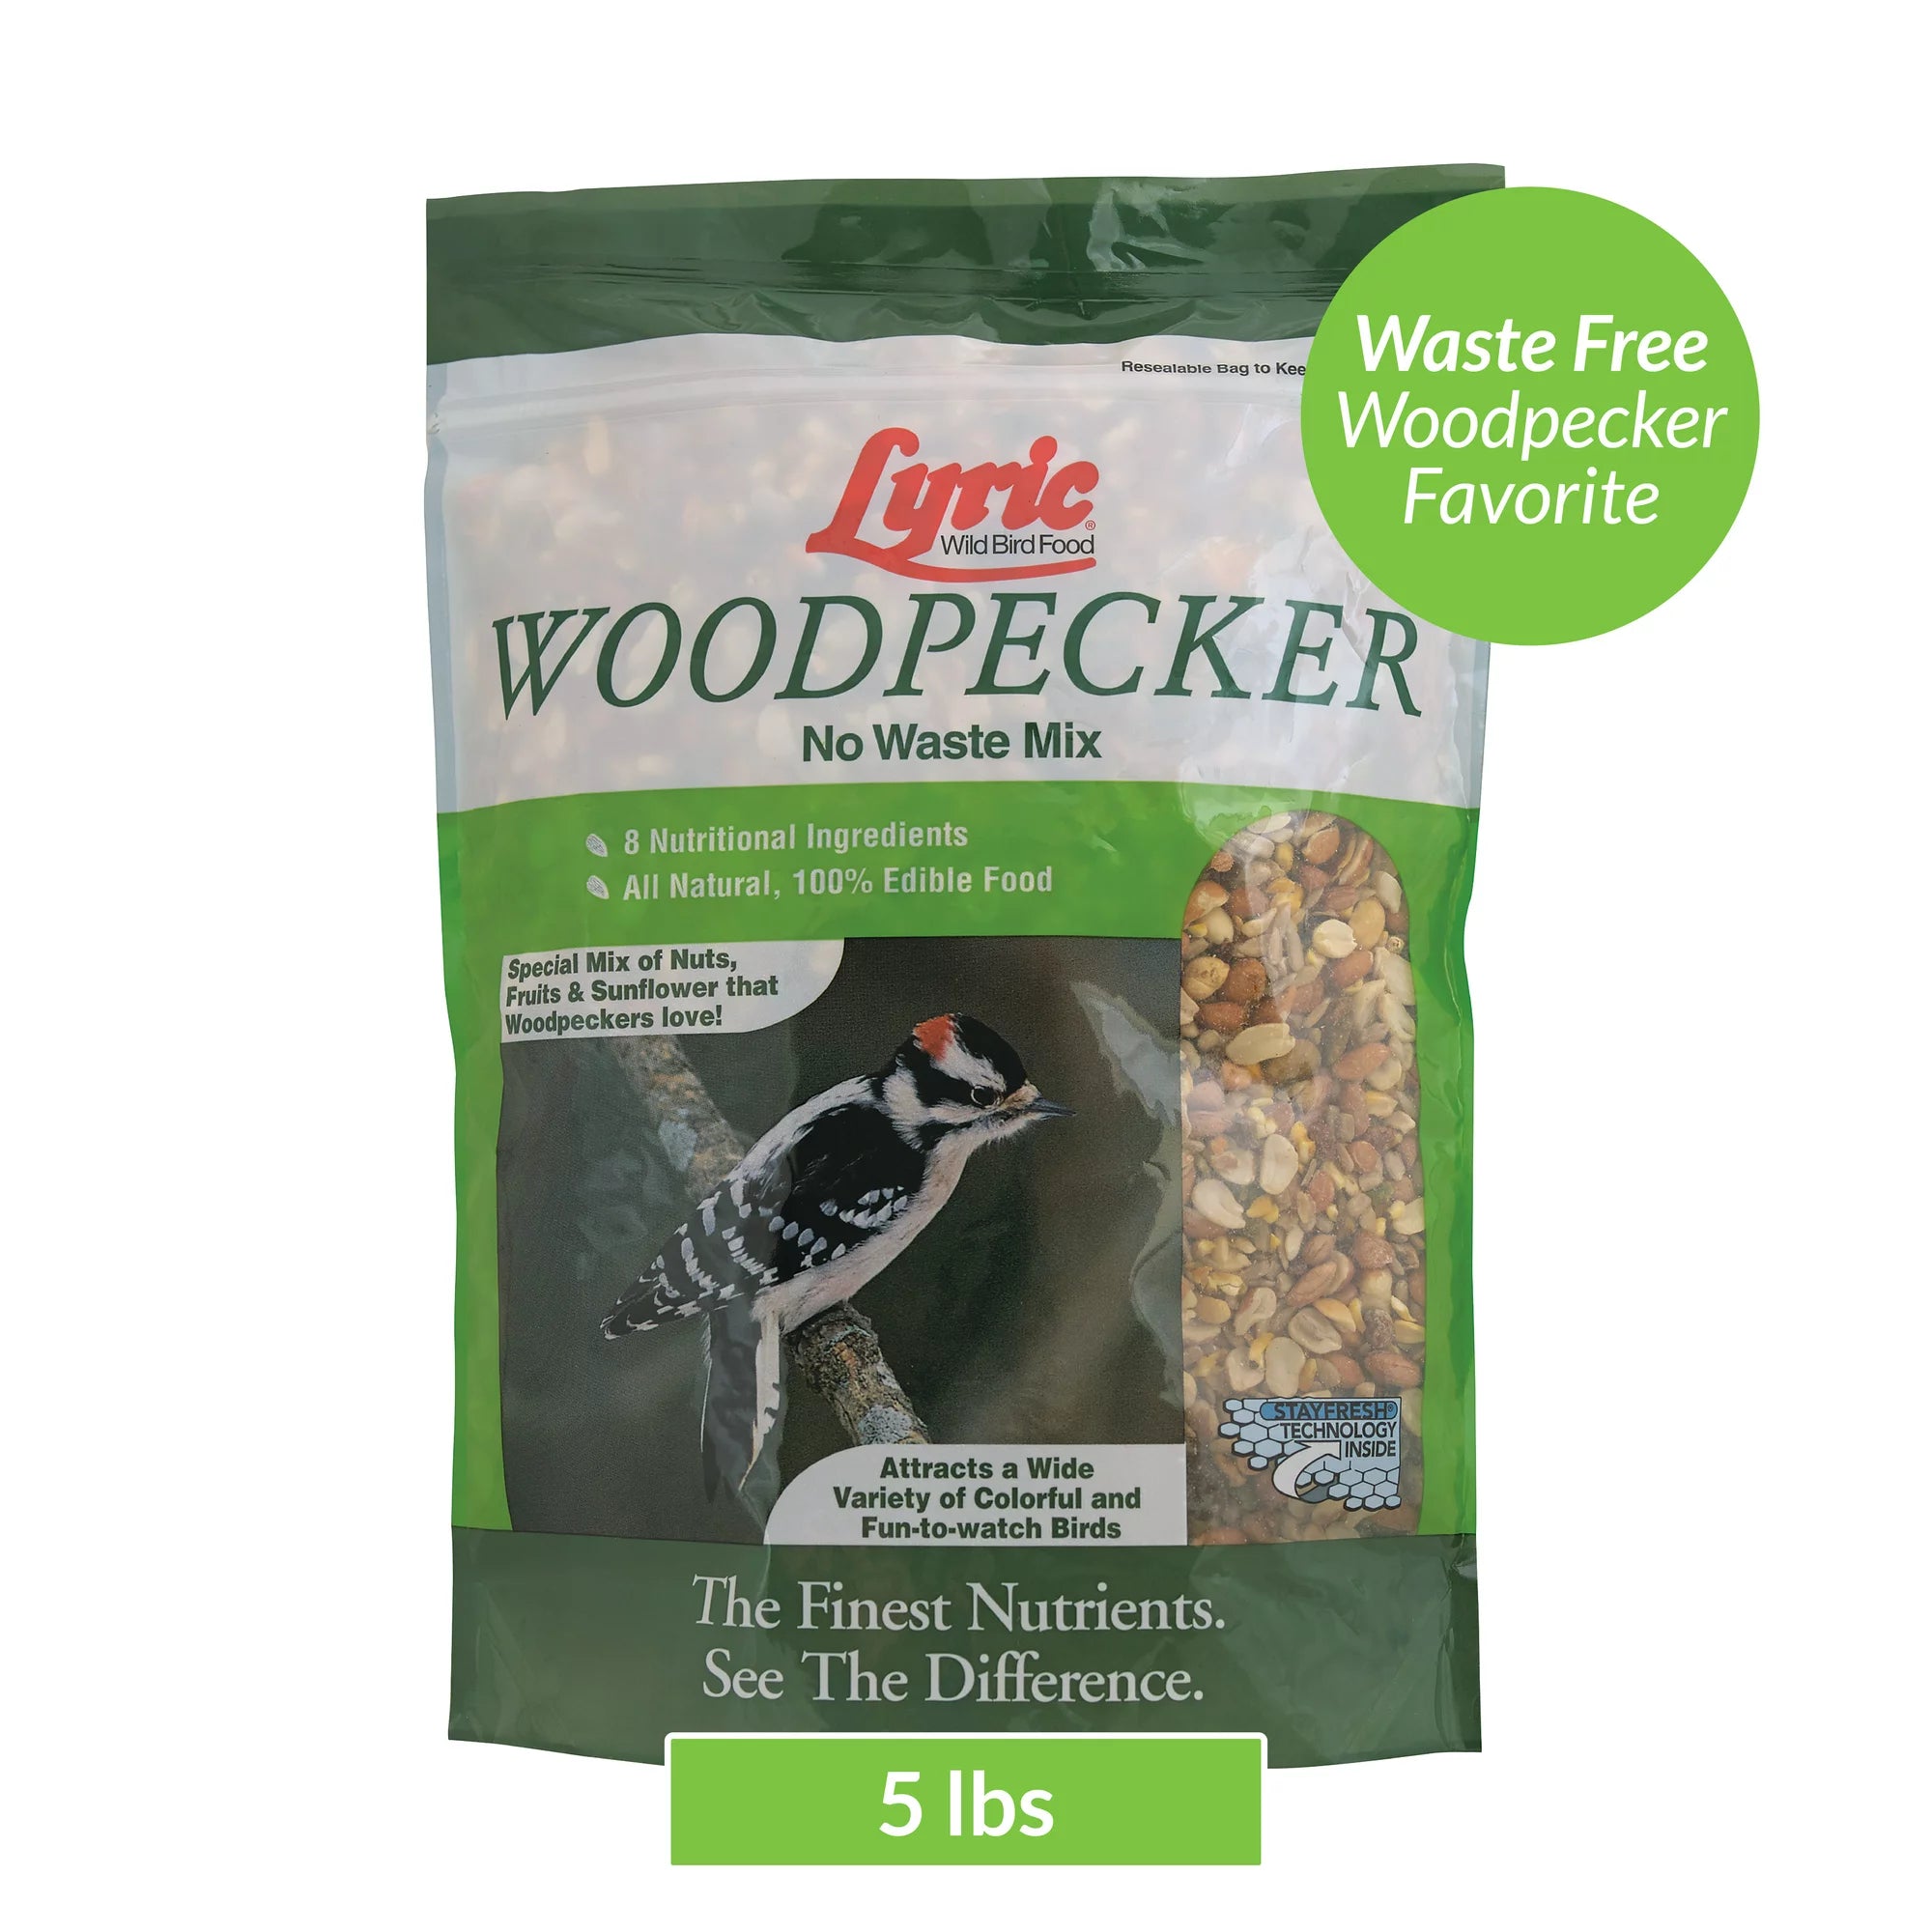 Lyric woodpecker is a great seed for Woodpeckers with little waste and high nutrition